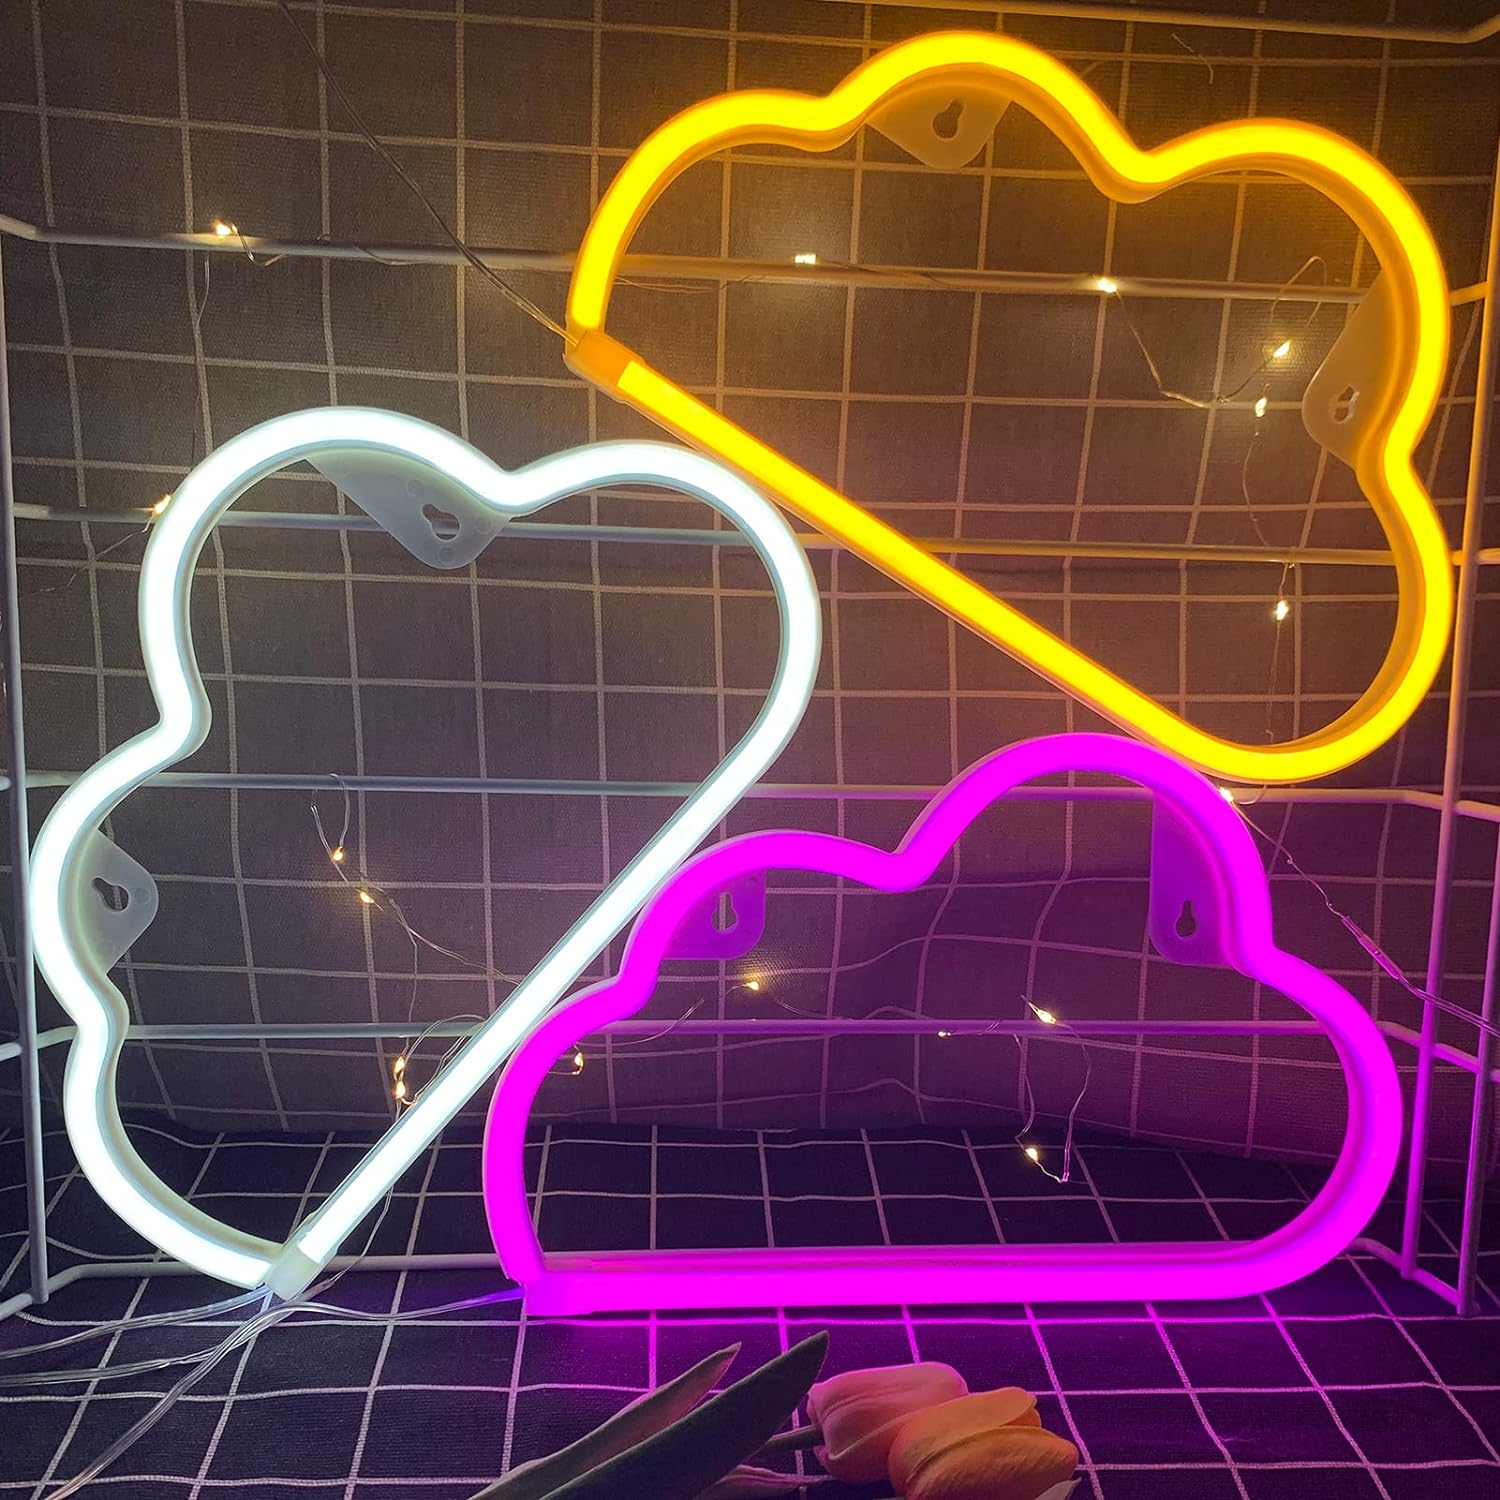 Cloud Neon Signs, LED Cloud Neon Light for Wall Decor, Battery or USB Powered Cloud Sign Shaped Decoration Wall Lights for Bedroom Aesthetic Teen Girl Kid Room Christmas Birthday Wedding Party White